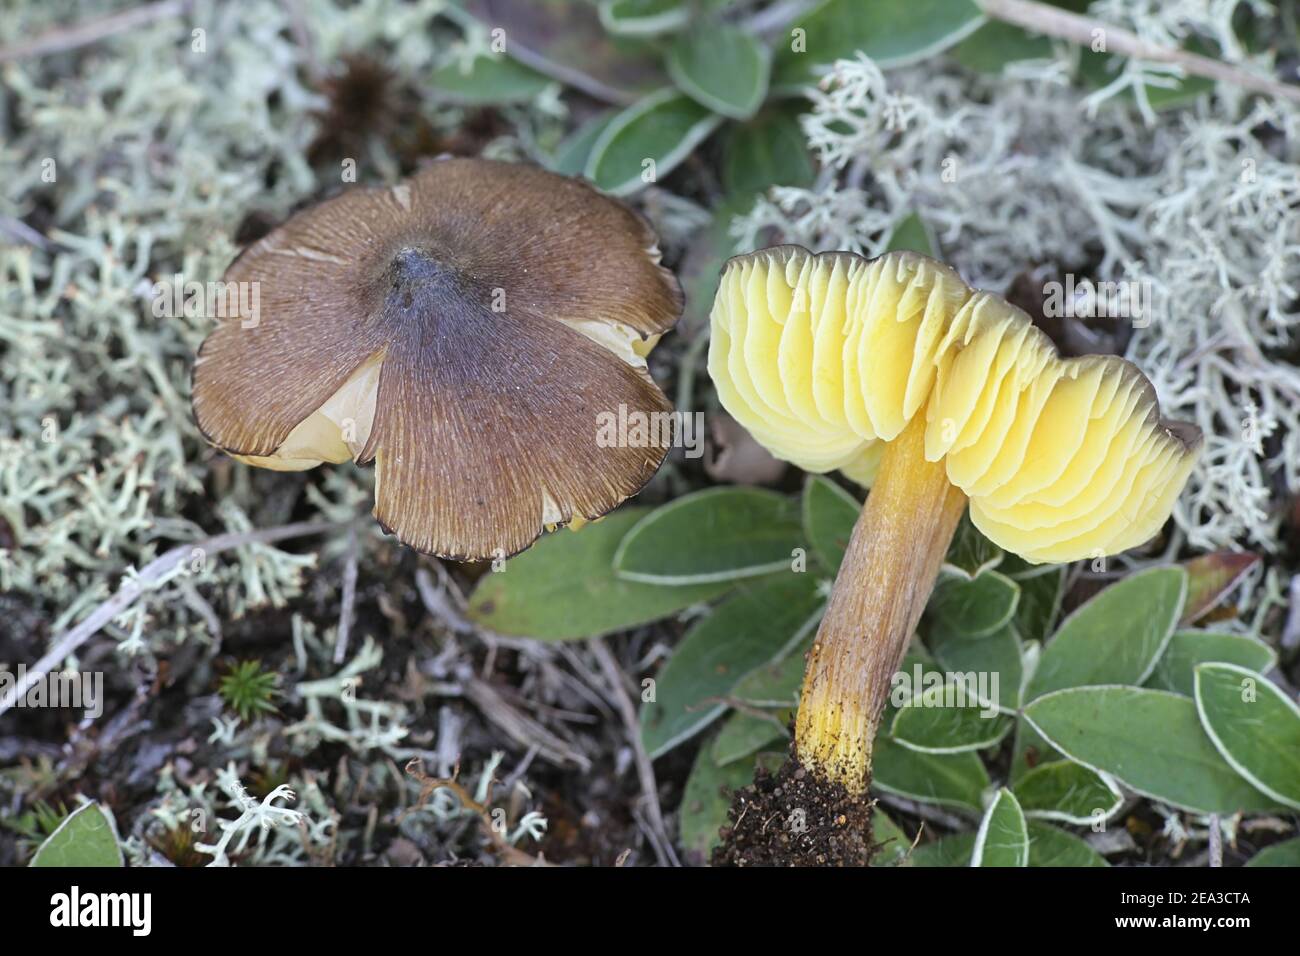 Hygrocybe spadicea, known as date waxcap, wild mushroom from Finland Stock Photo